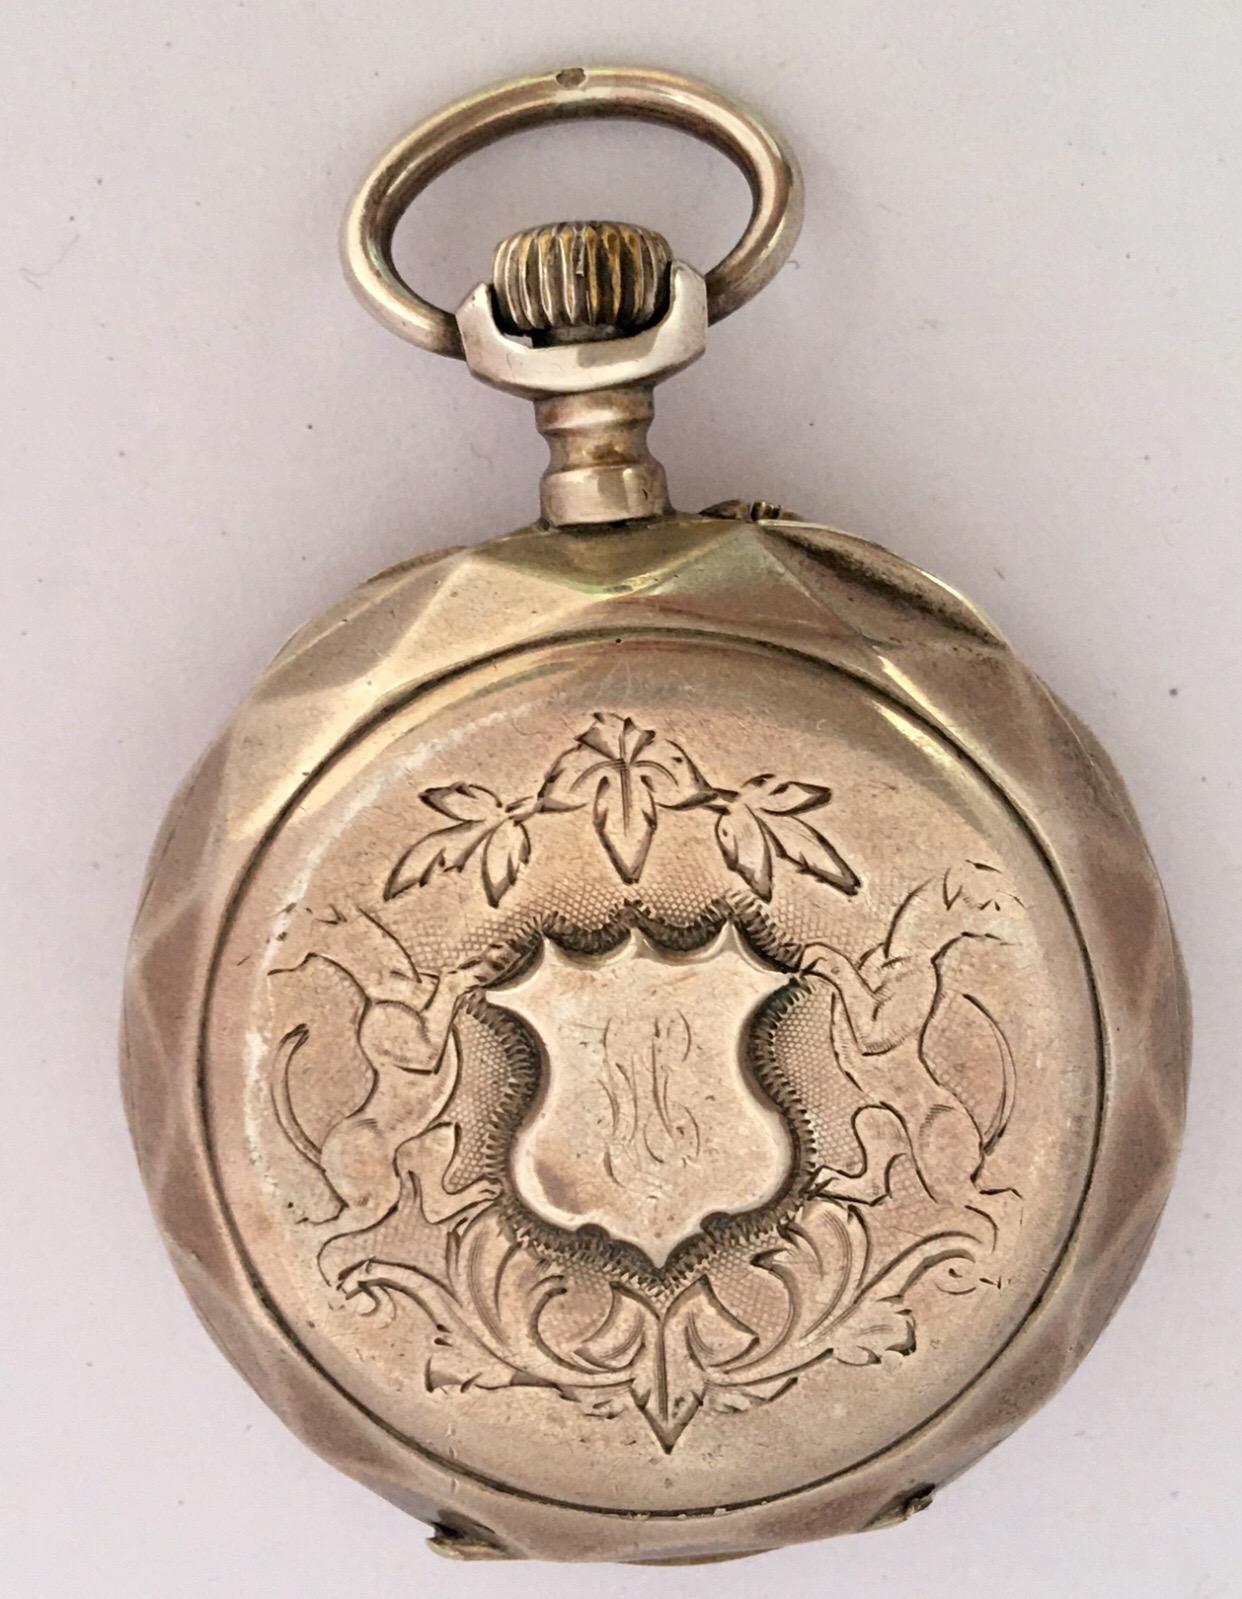 This beautiful antique 48mm diameter hand winding (keyless) silver pocket watch is in good working condition and it is running well(It keeps a good time).  Visible signs of ageing and wear with small light marks on the glass and on the watch case as